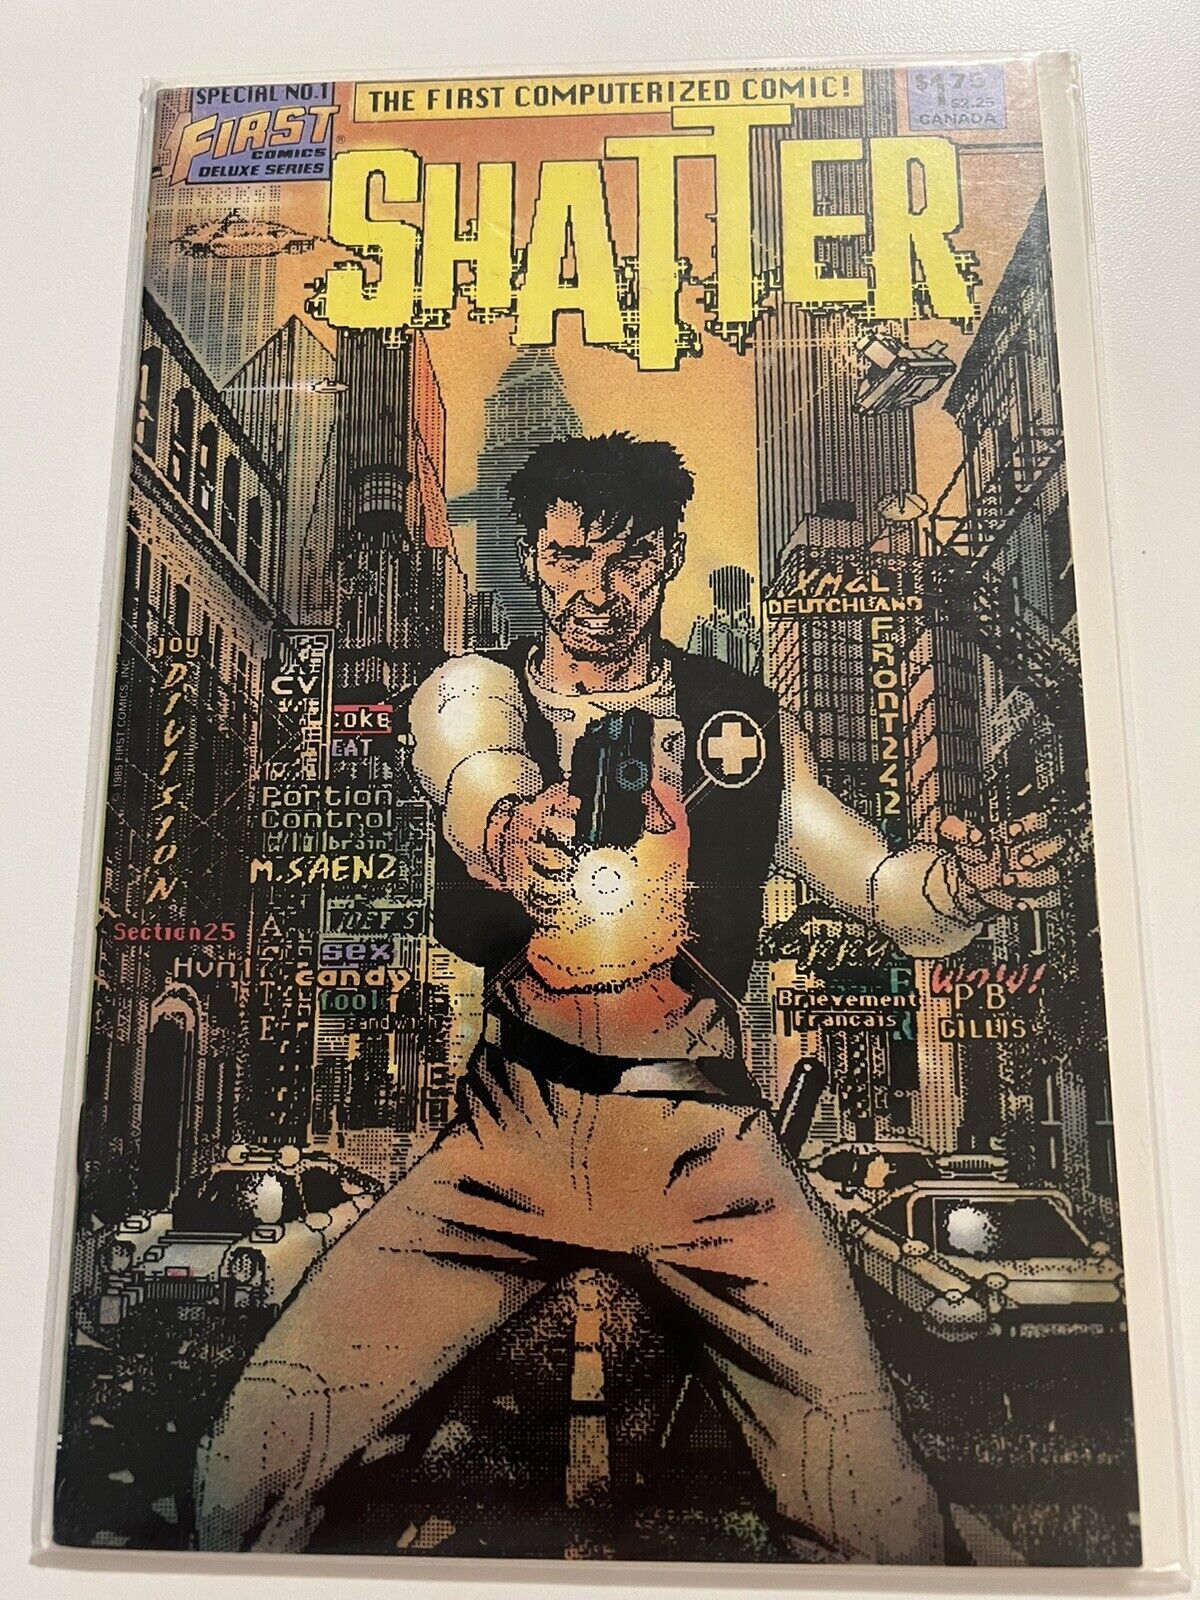 Shatter Special #1 First Computerized Comic First Comics, 1985 VF+ B&B